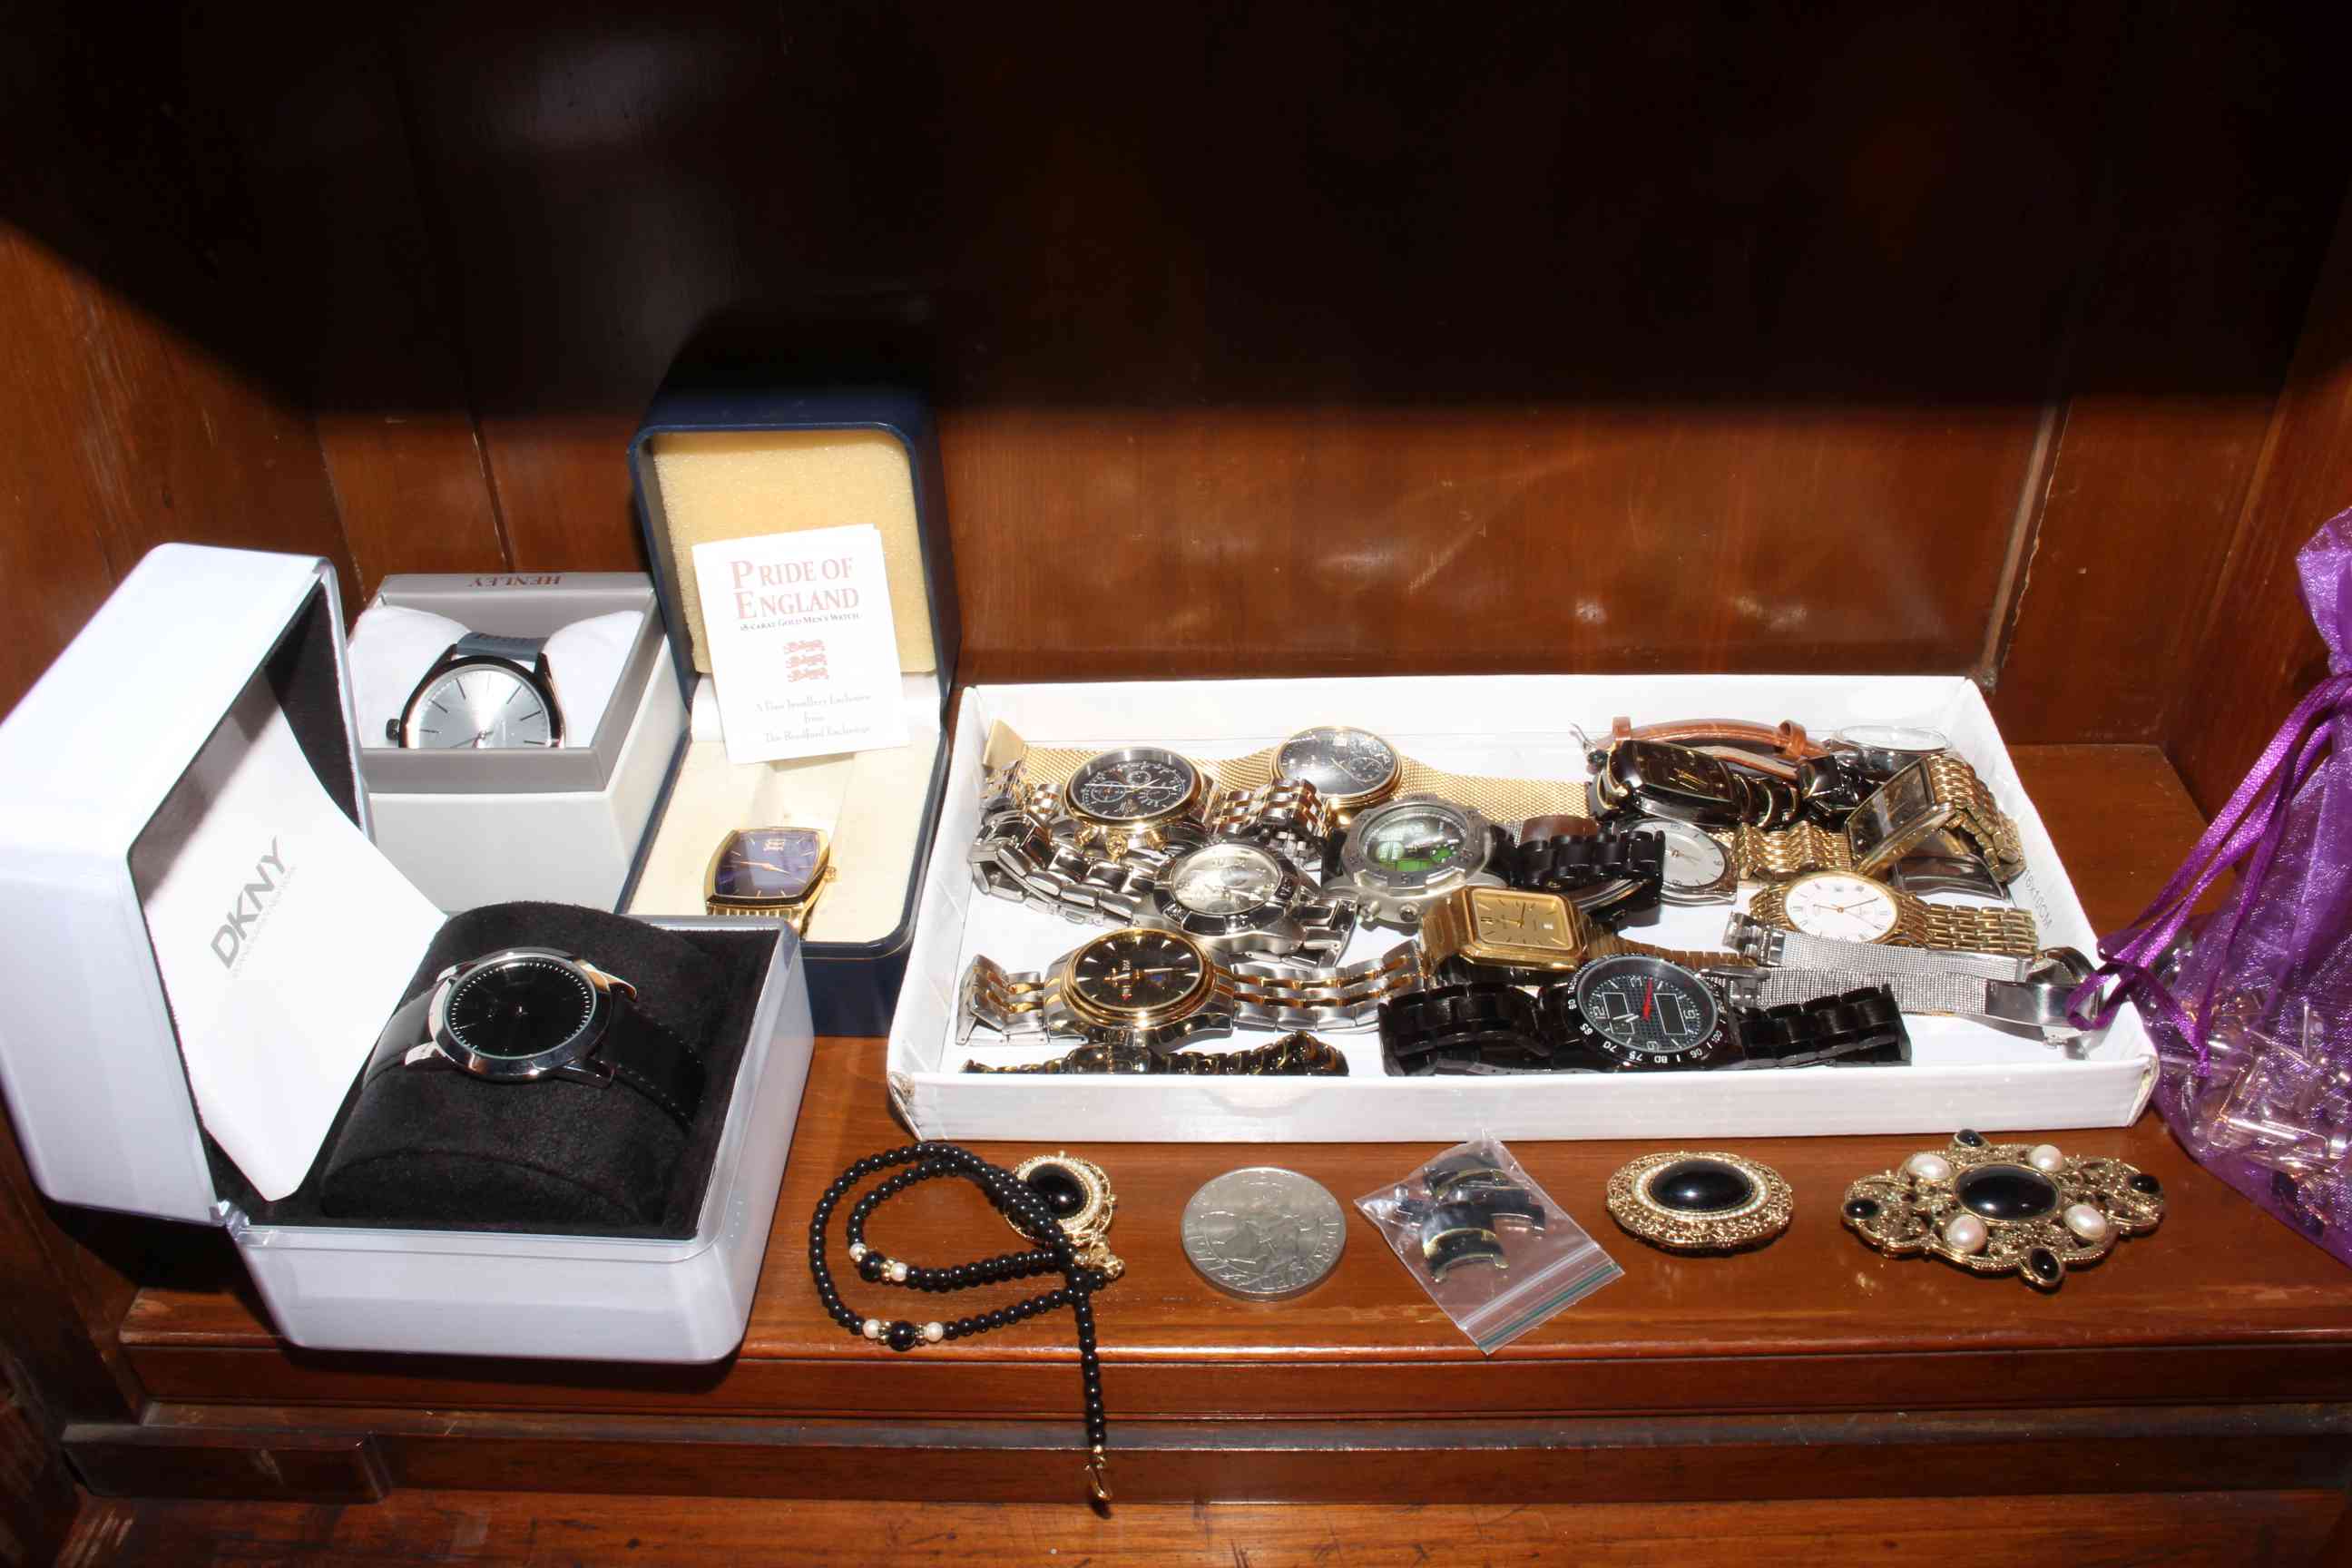 Collection of jewellery and watches.